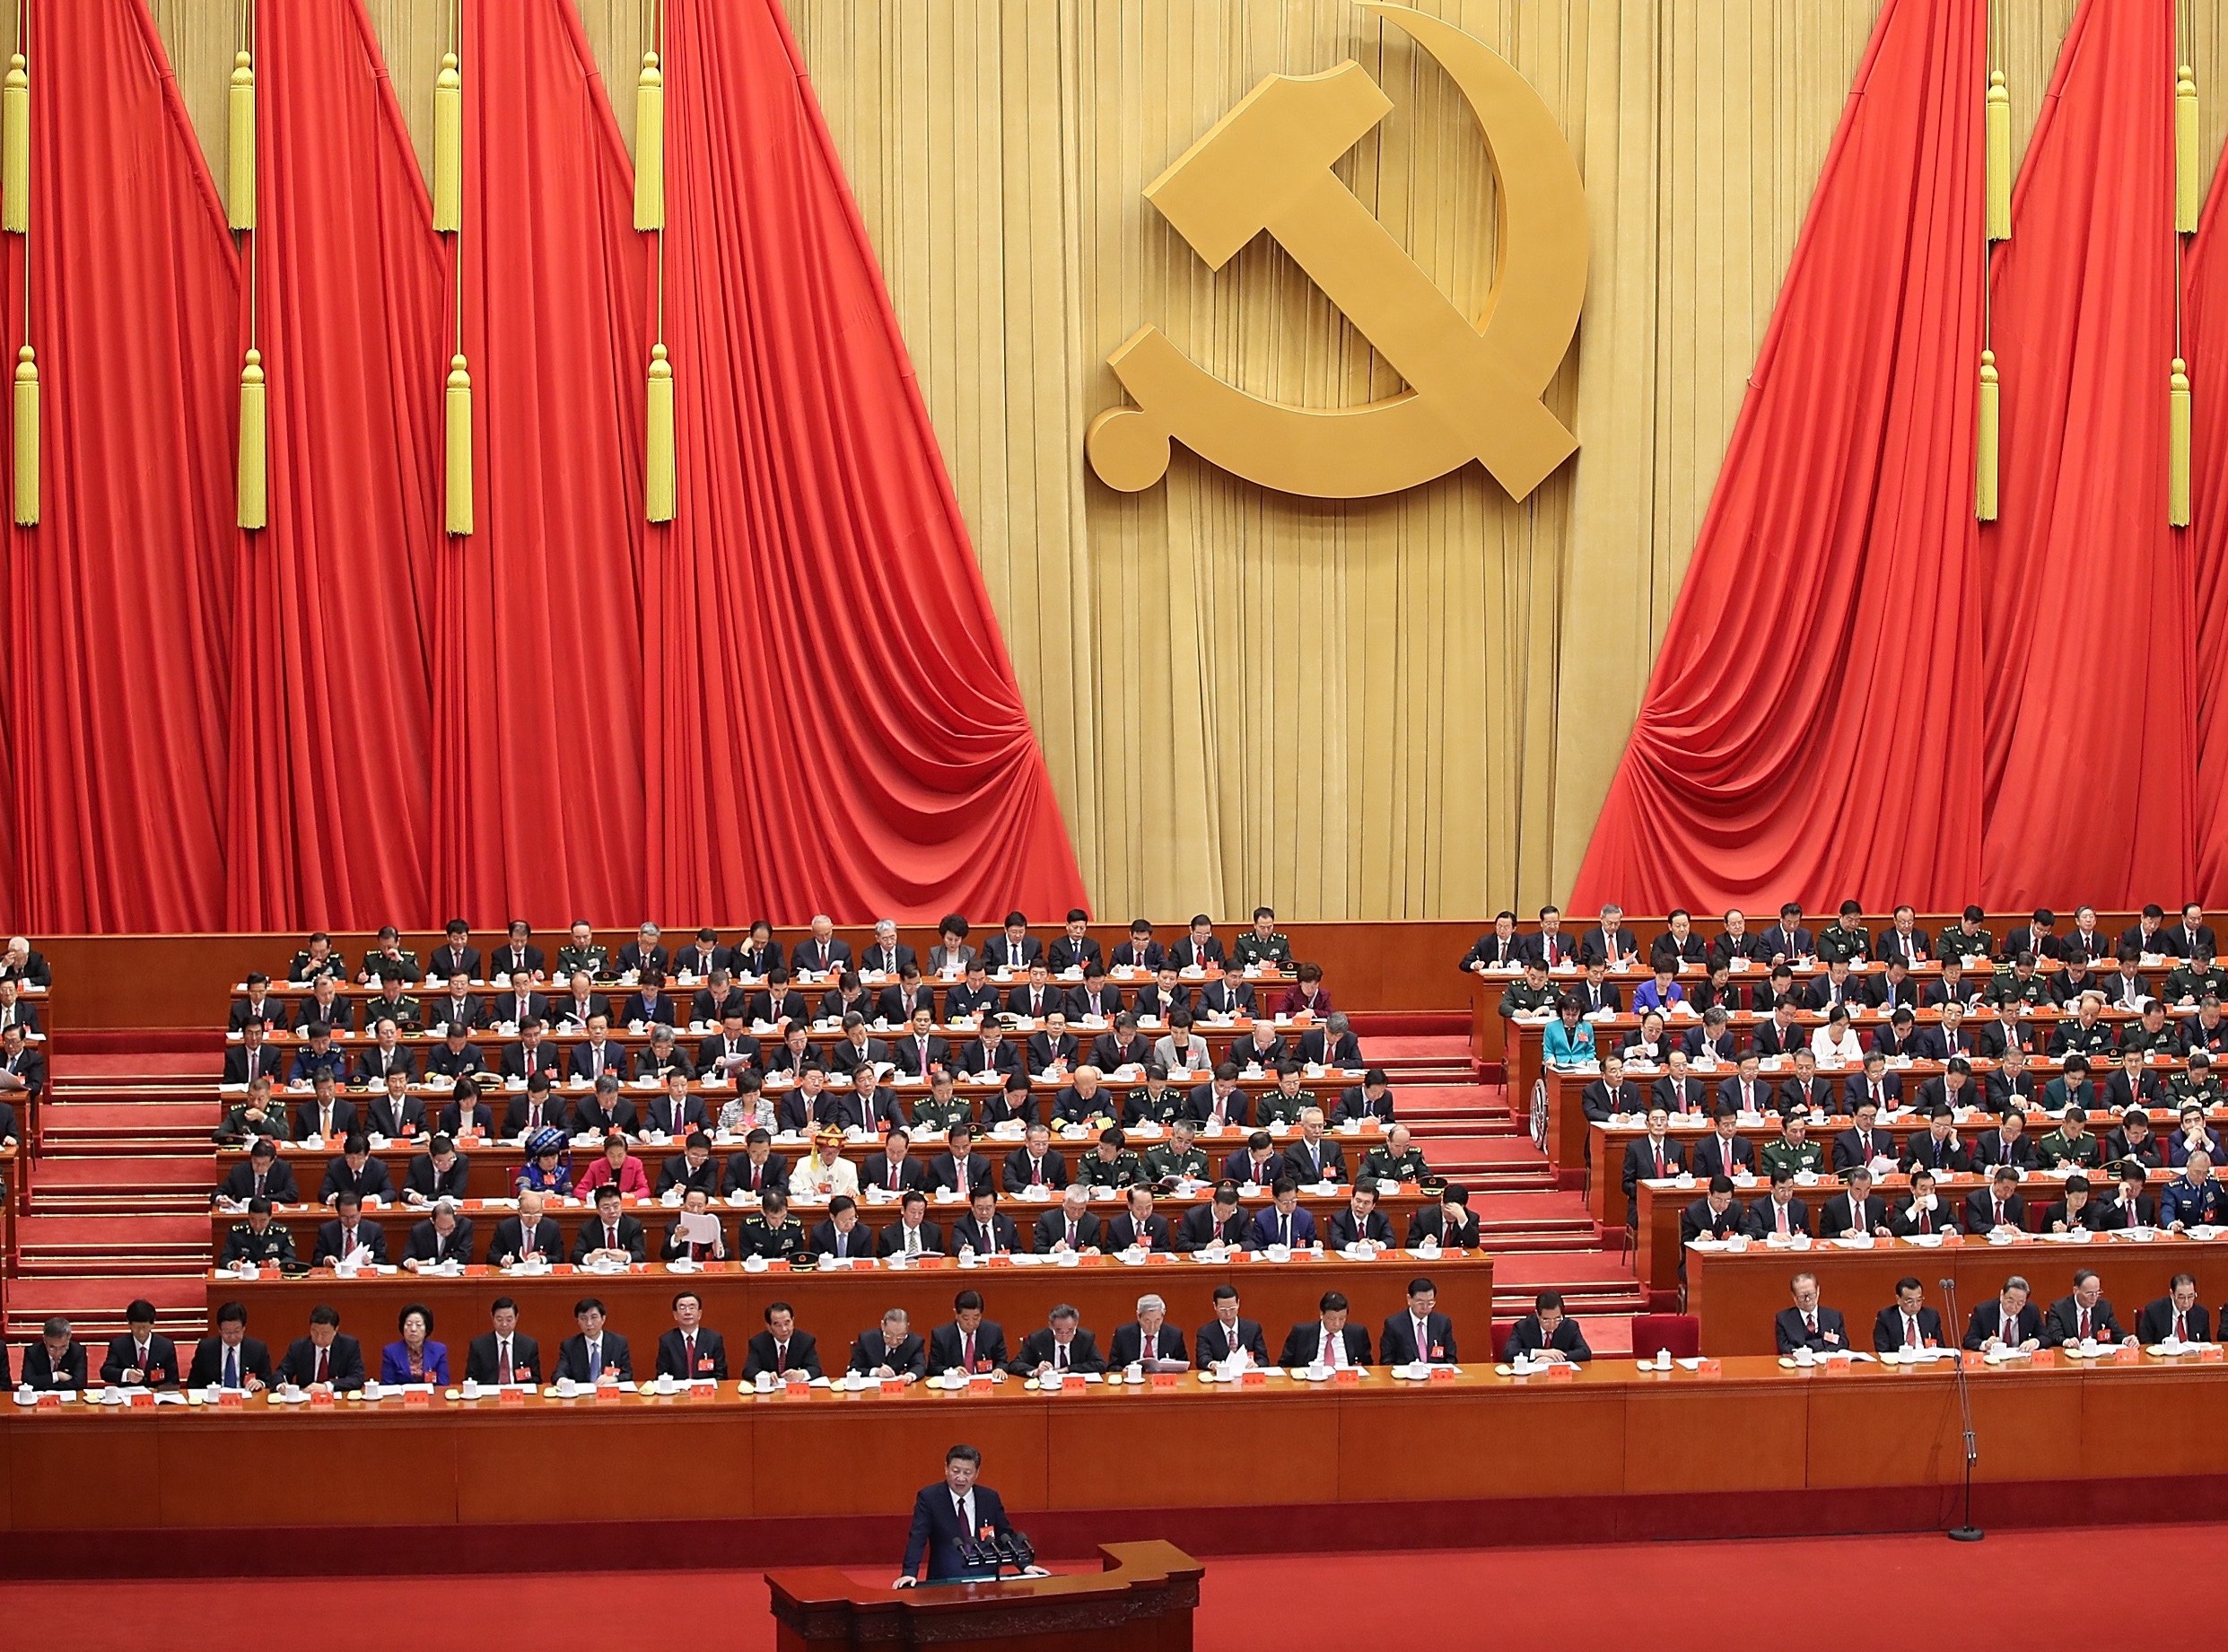 19th national congress of the communist party of china bitcoin